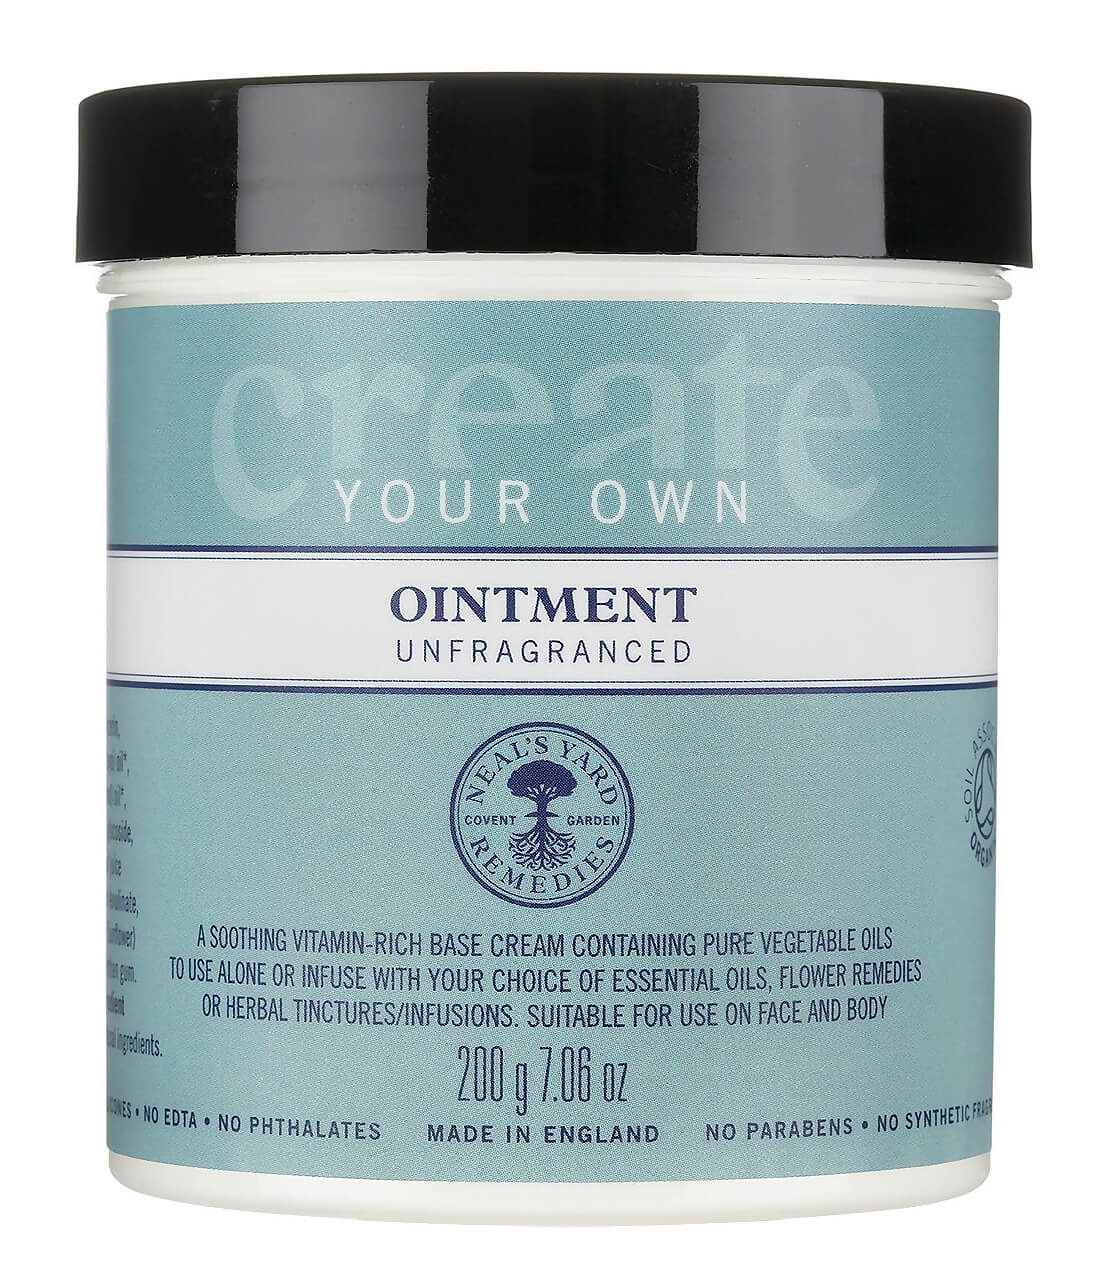 Neal's Yard Remedies Create Your Own Ointment